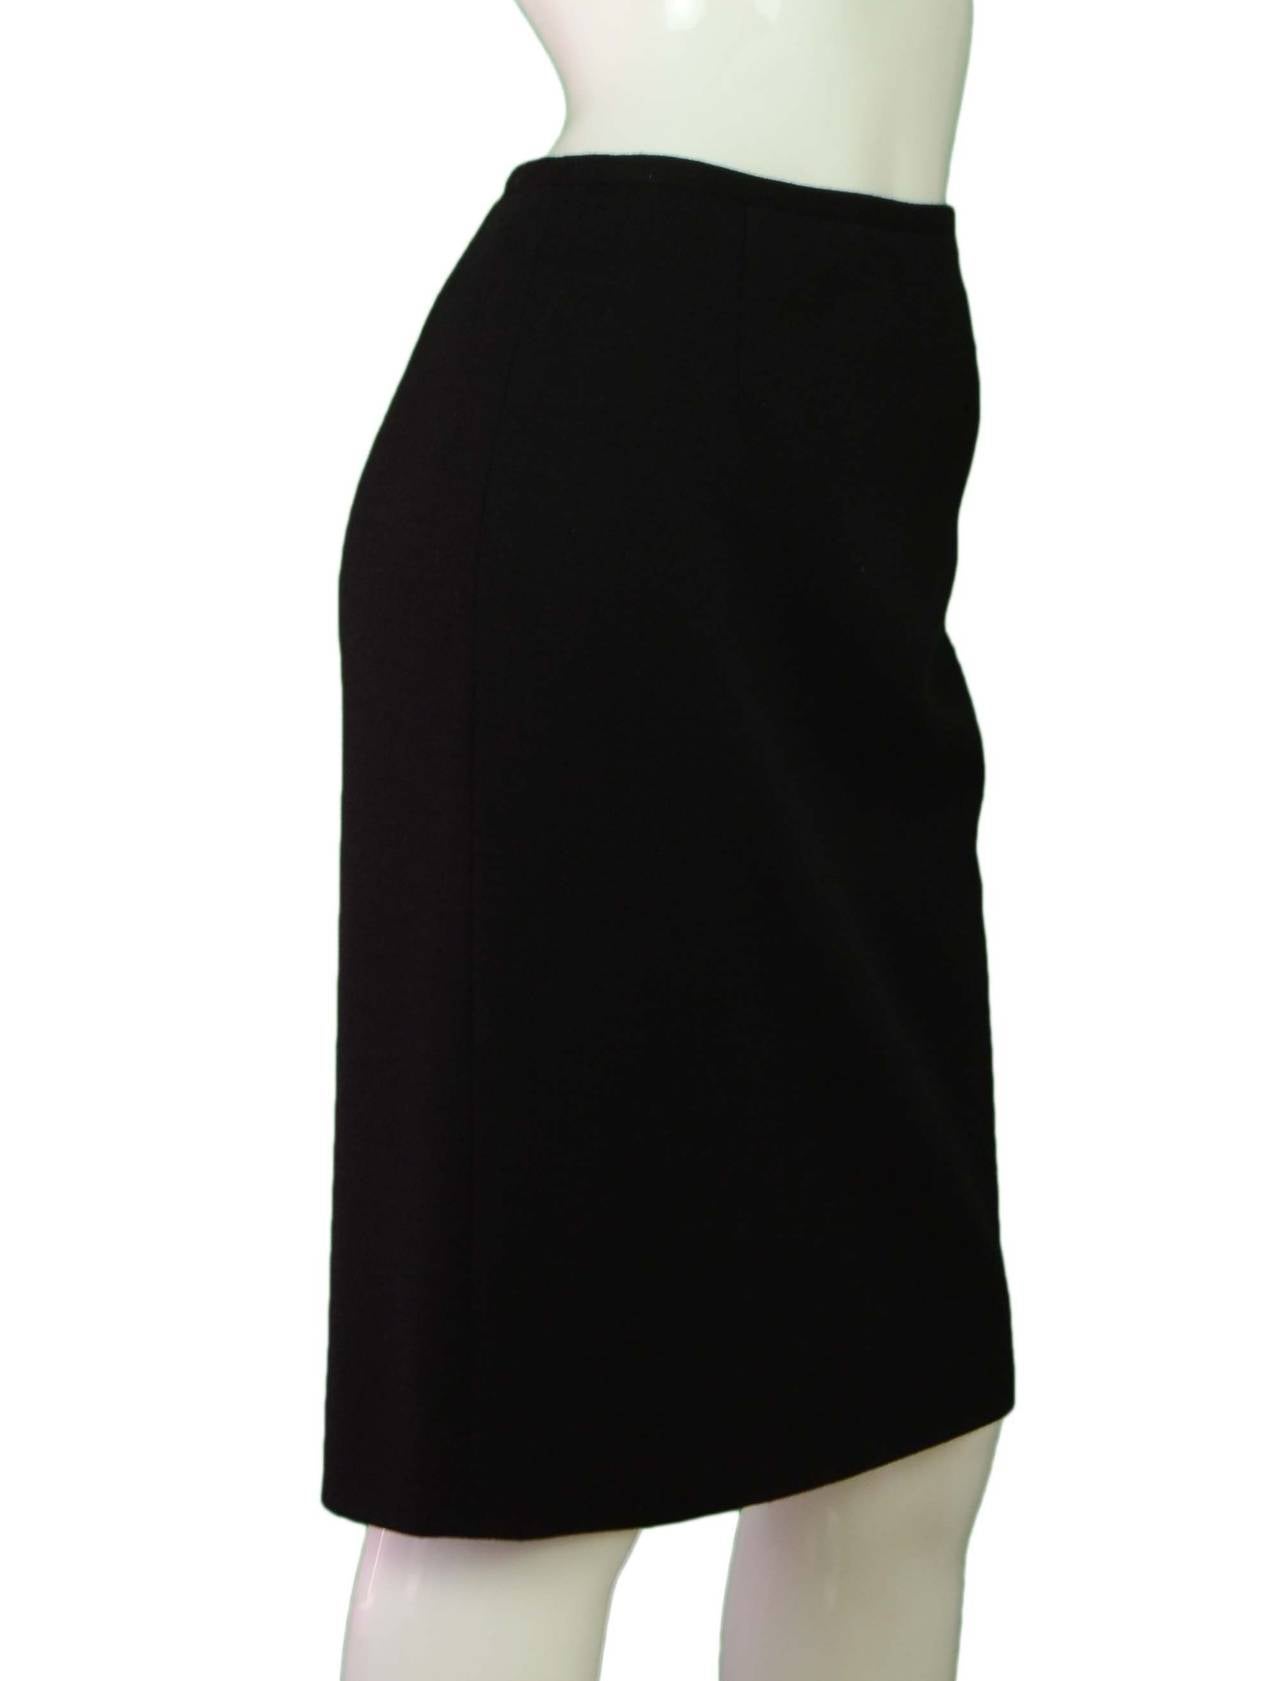 Hermes Black Wool Pencil Skirt
Made in: Italy
Color: Black
Composition: 100% wool
Lining: Black, 100% silk
Closure/opening: Back center zipper and button eye closure
Exterior Pockets: None
Interior Pockets: None
Overall Condition: Excellent